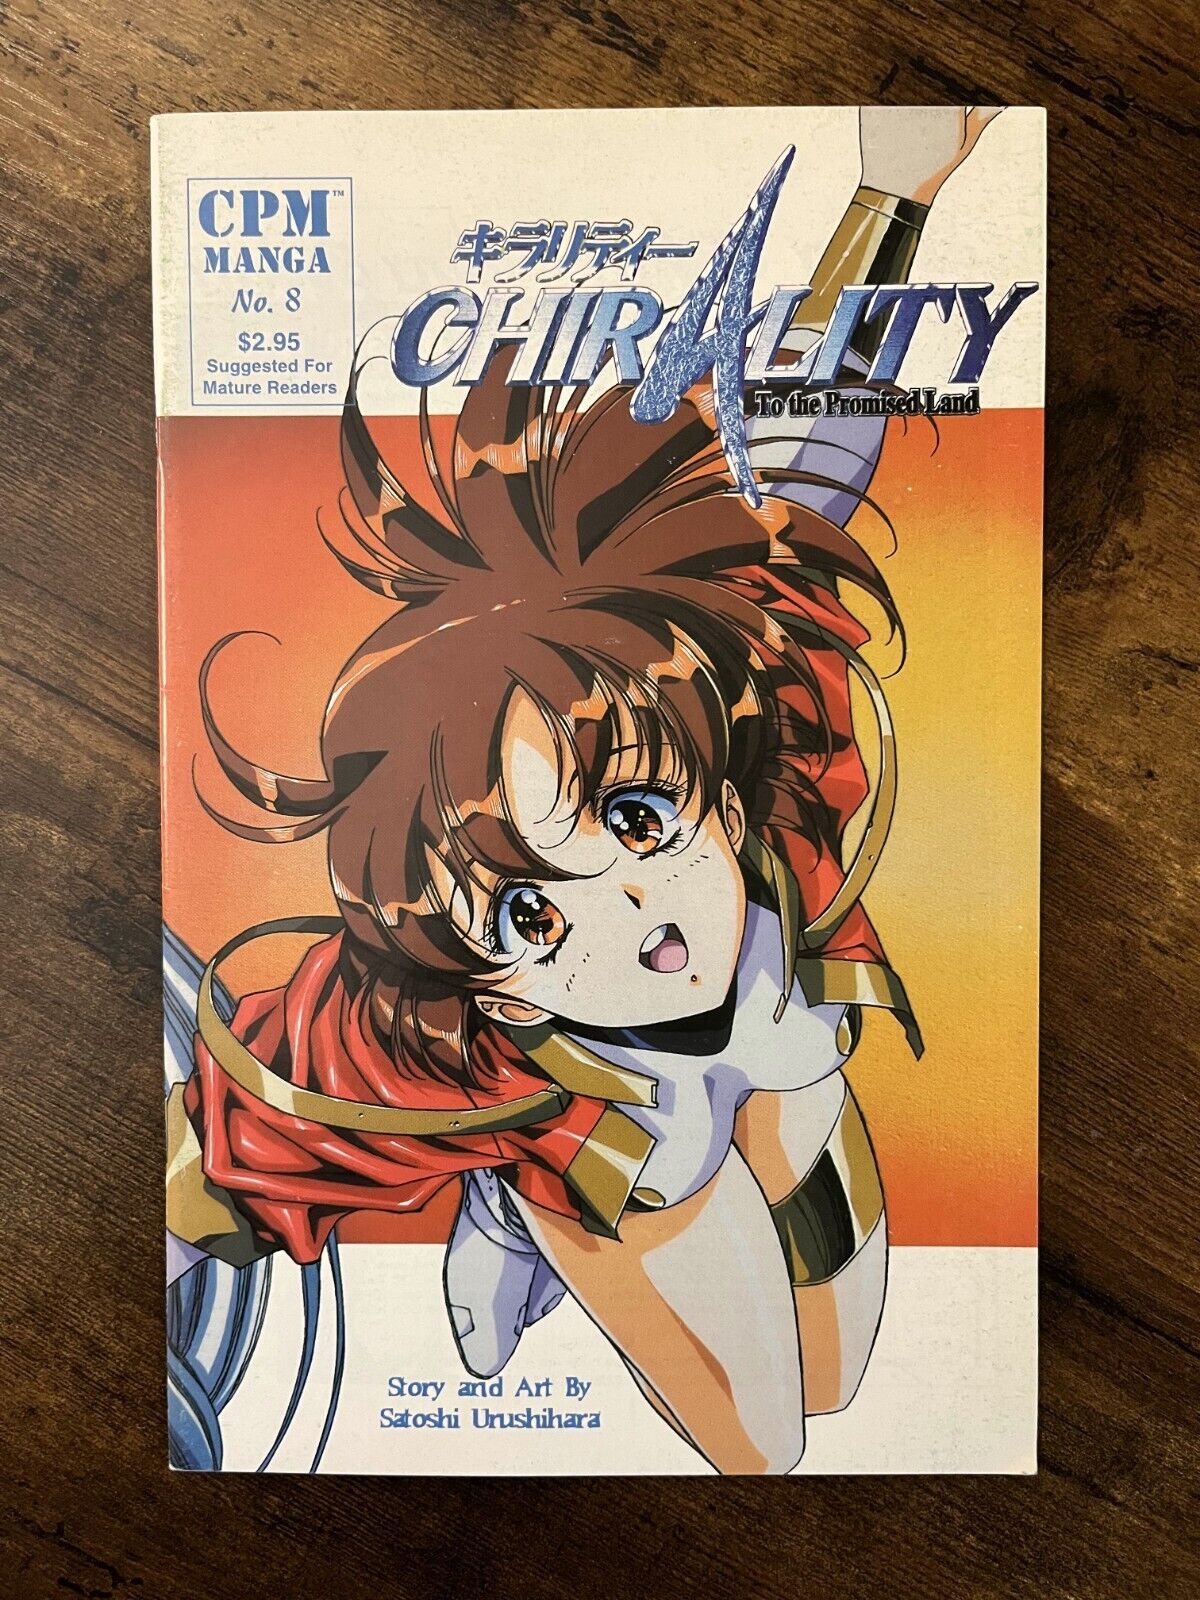 Chirality To The Promised Land #8 CPM Manga (1997) 6.0 FN Anime